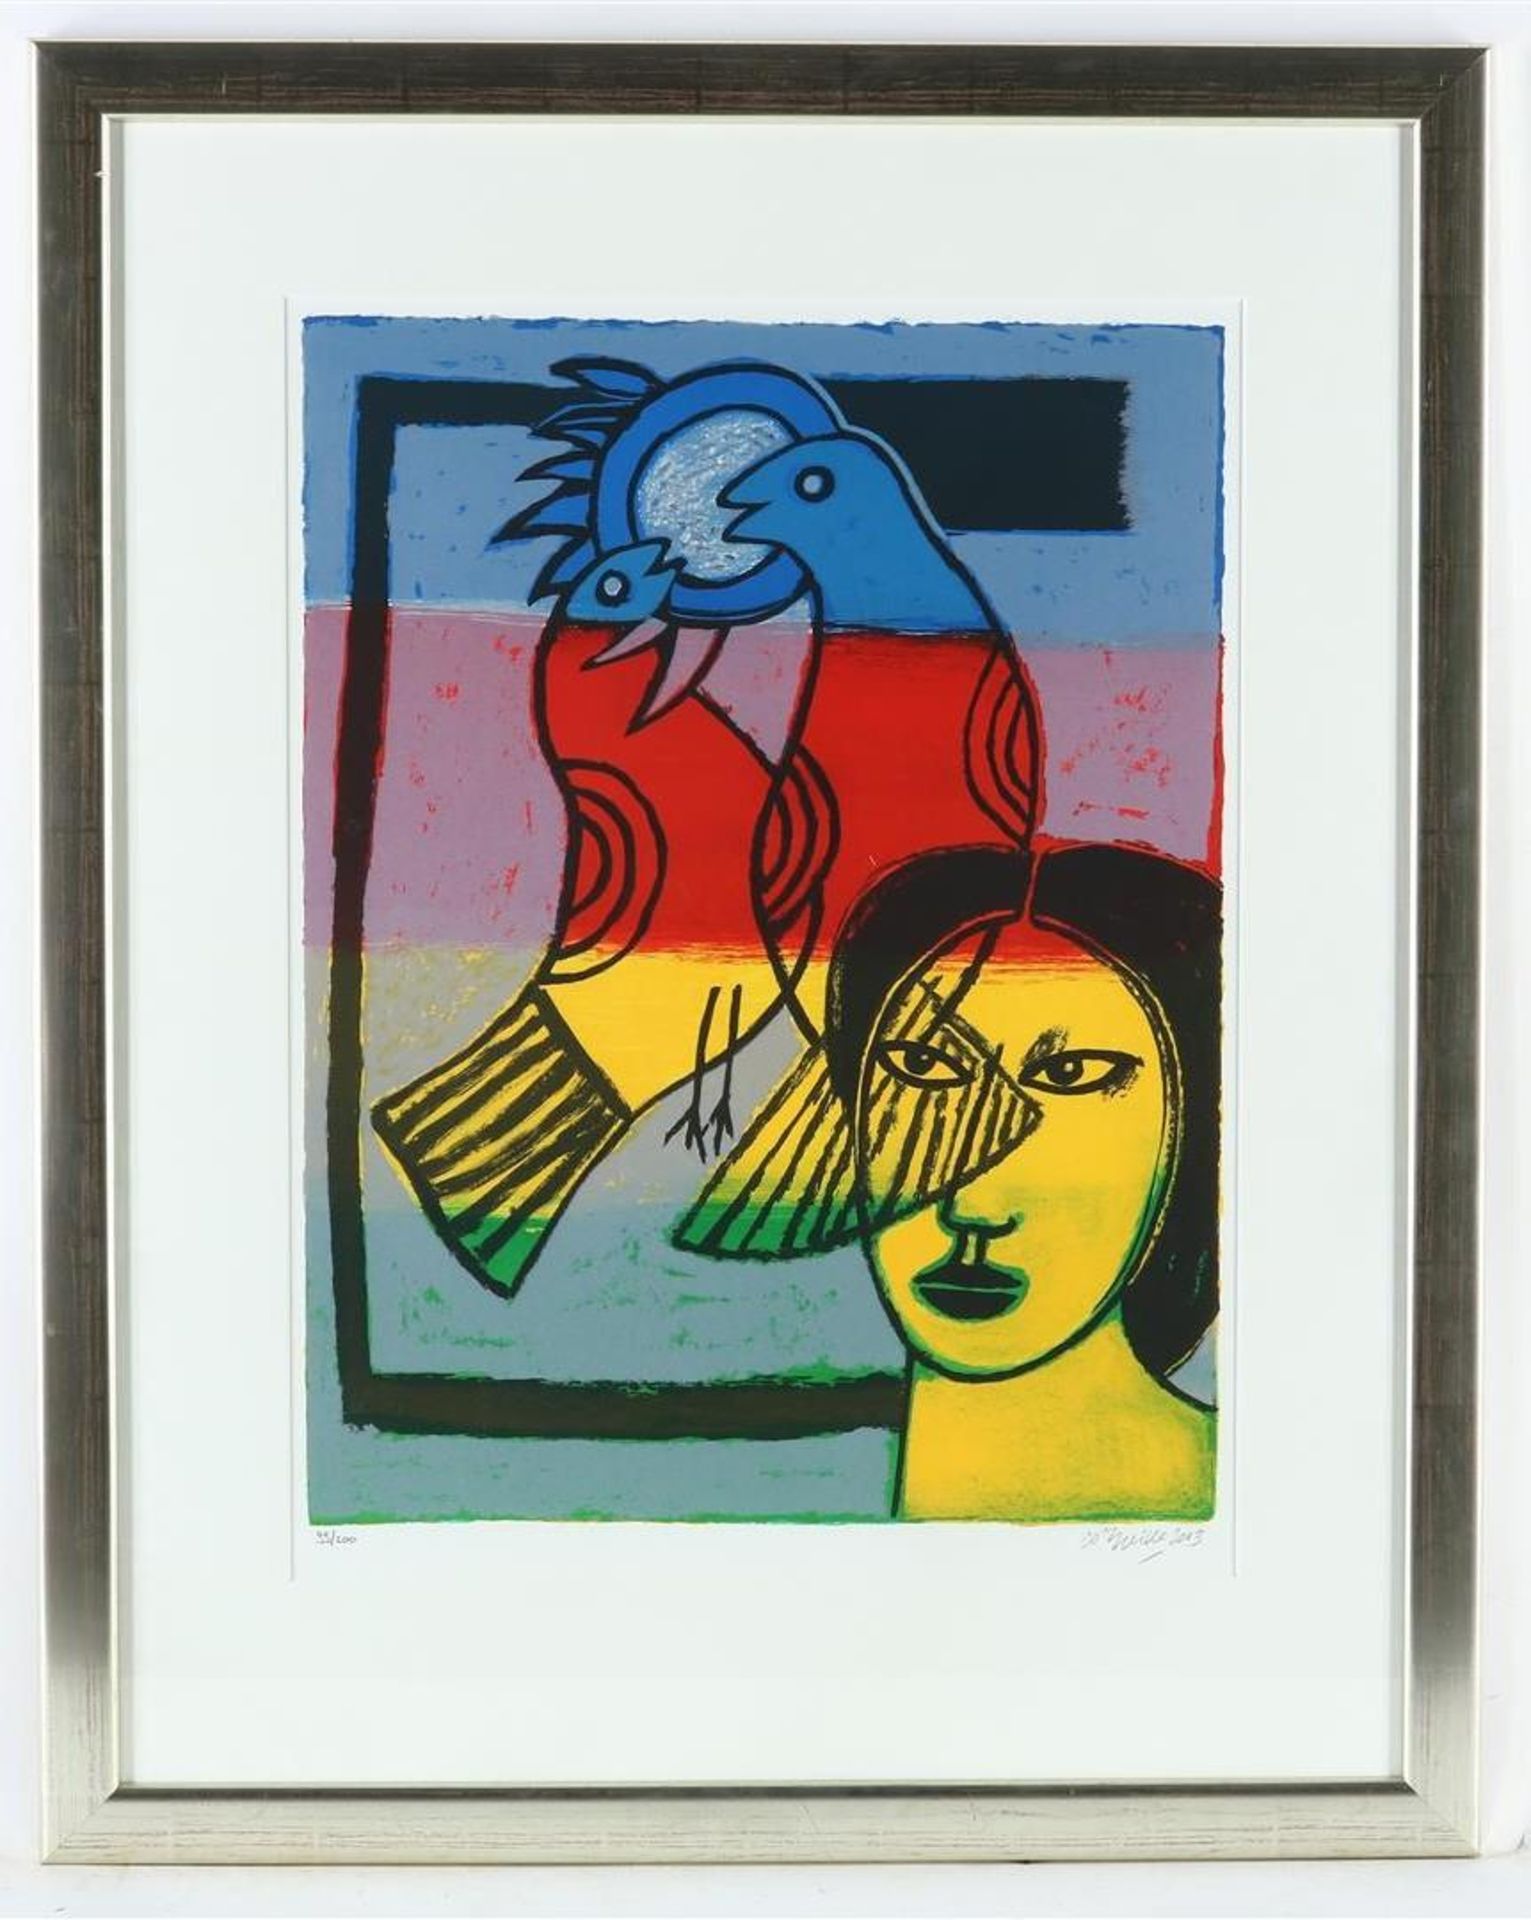 Corneille (Cornelis Guillaume van Beverloo) (1922-2010) Multicolored birds, signed lower right and - Image 4 of 5